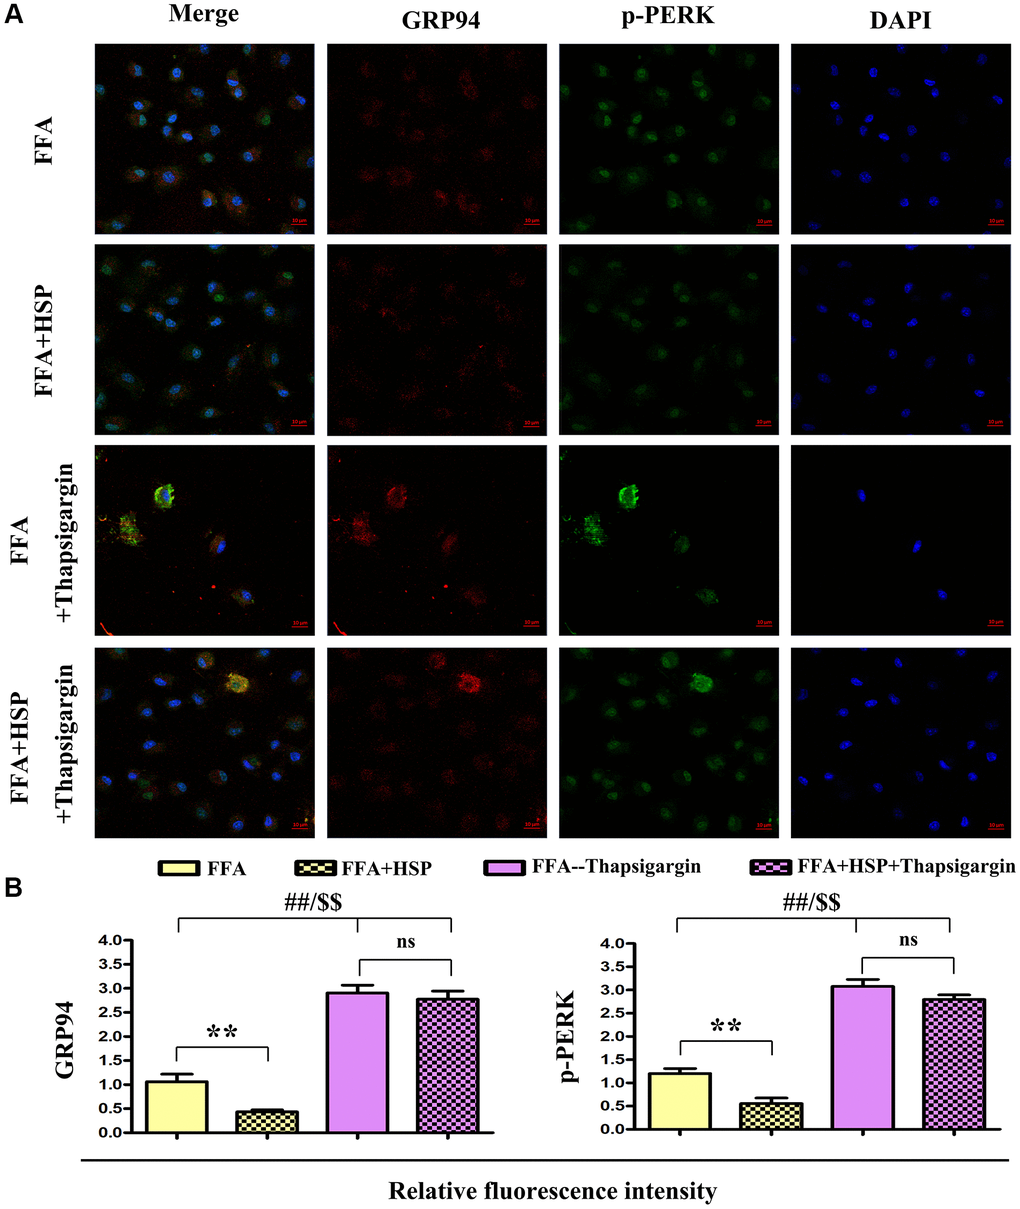 HSP attenuates ERS in human THP-1 cells. As described in the method, FFA-stimulated human THP-1 cells were employed to establish the NAFLD model. Thapsigargin was used to simulate the in vitro ERS model. (A) Immunofluorescence staining was performed to examine the expression of GRP94 and p-PERK with or without HSP. (B) Relative fluorescence intensity of GRP94 and p-PERK. Data were presented as mean ± SEM. **P 